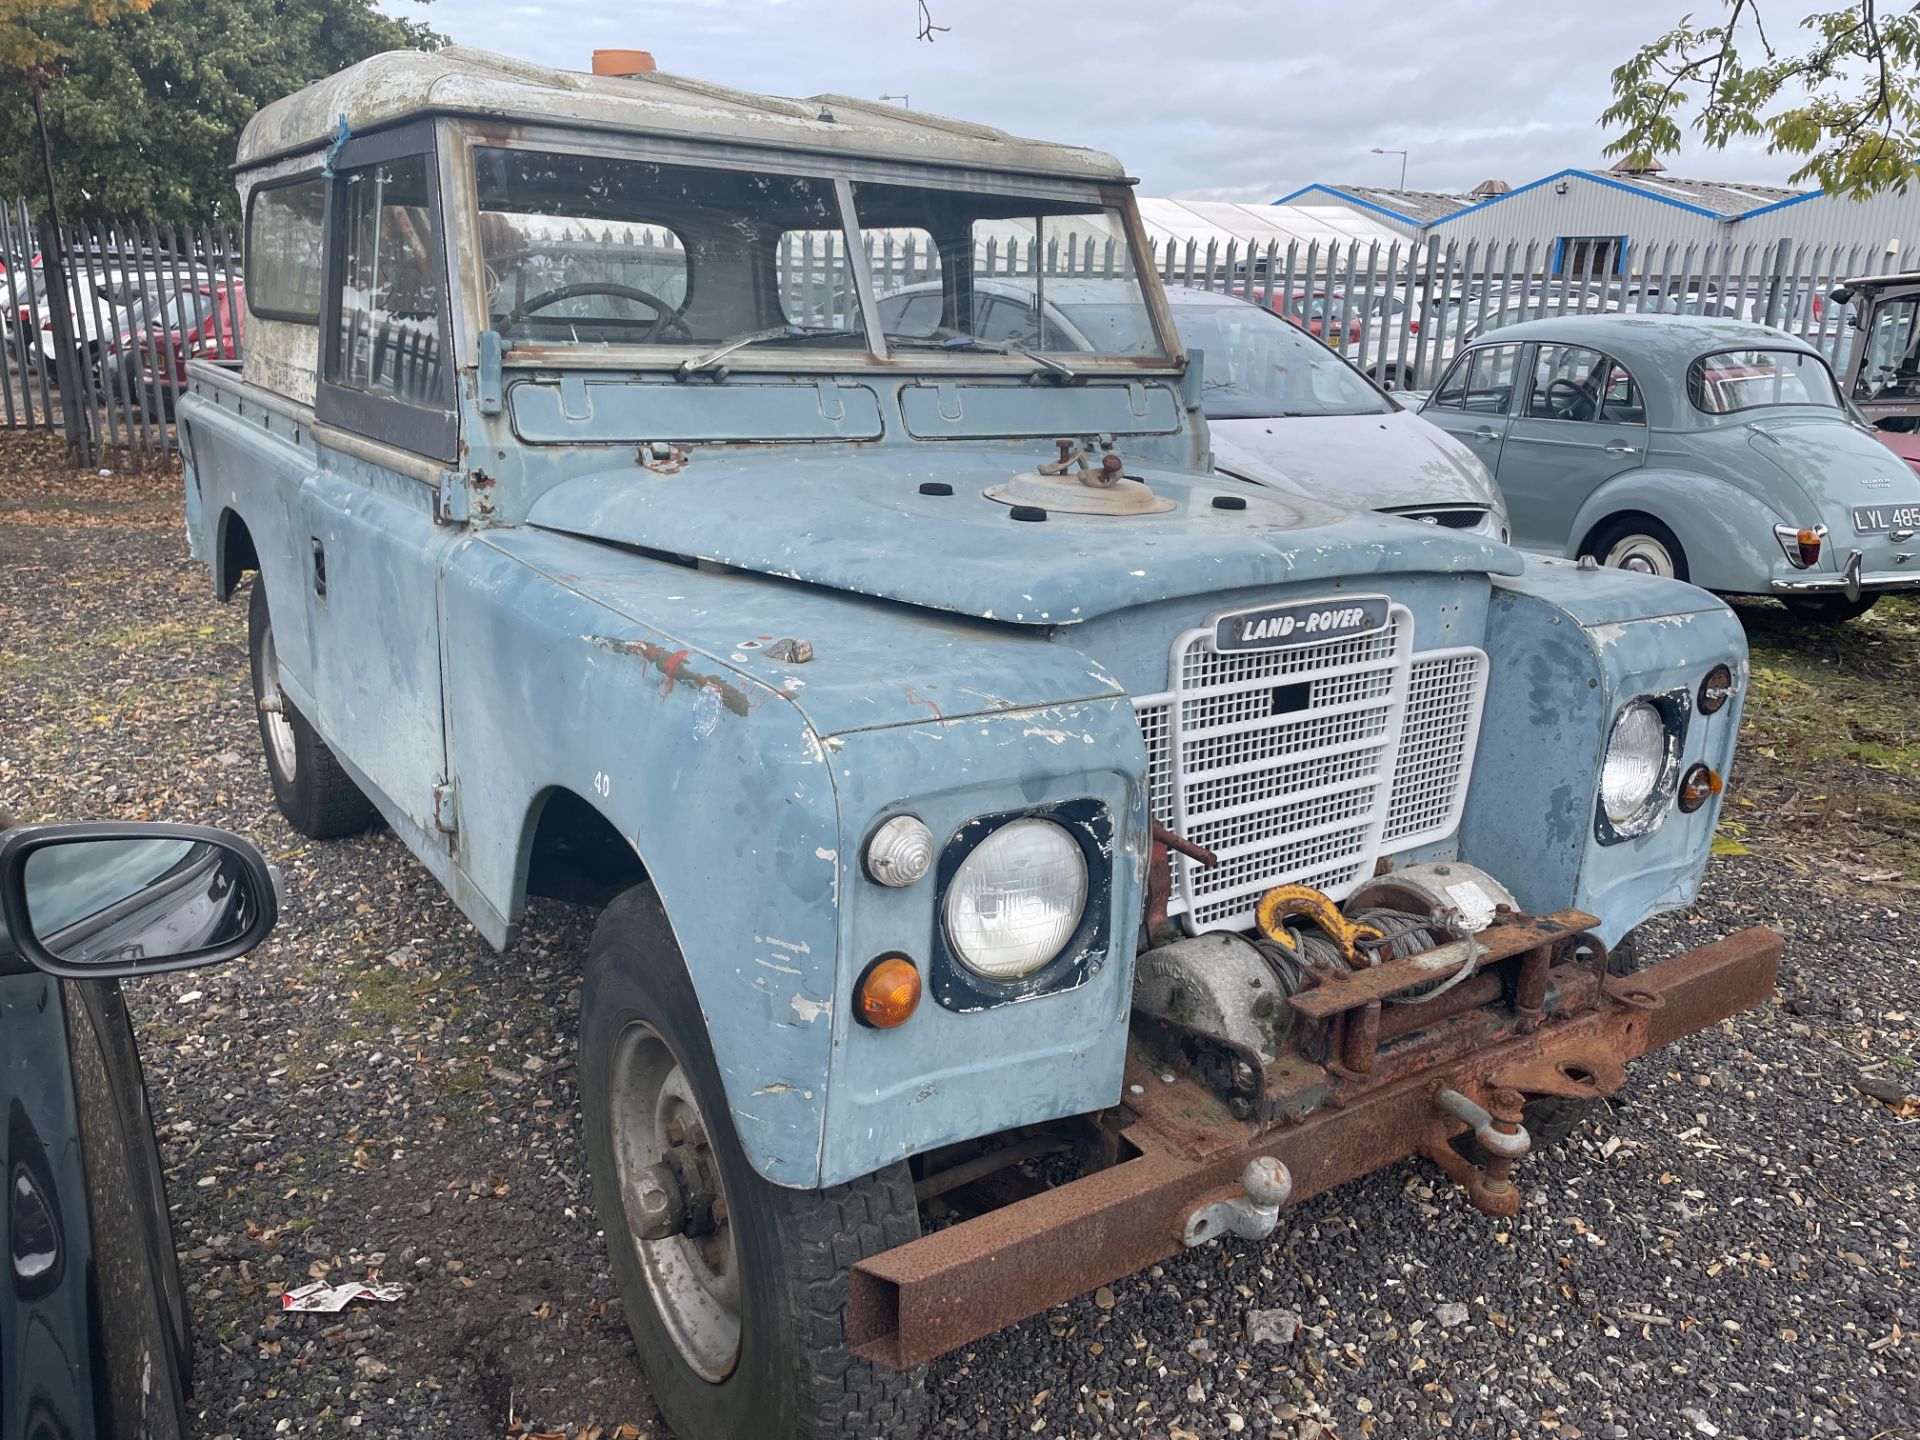 1973 Land Rover Series III 109 6 Cylinder Recovery" - Image 3 of 8